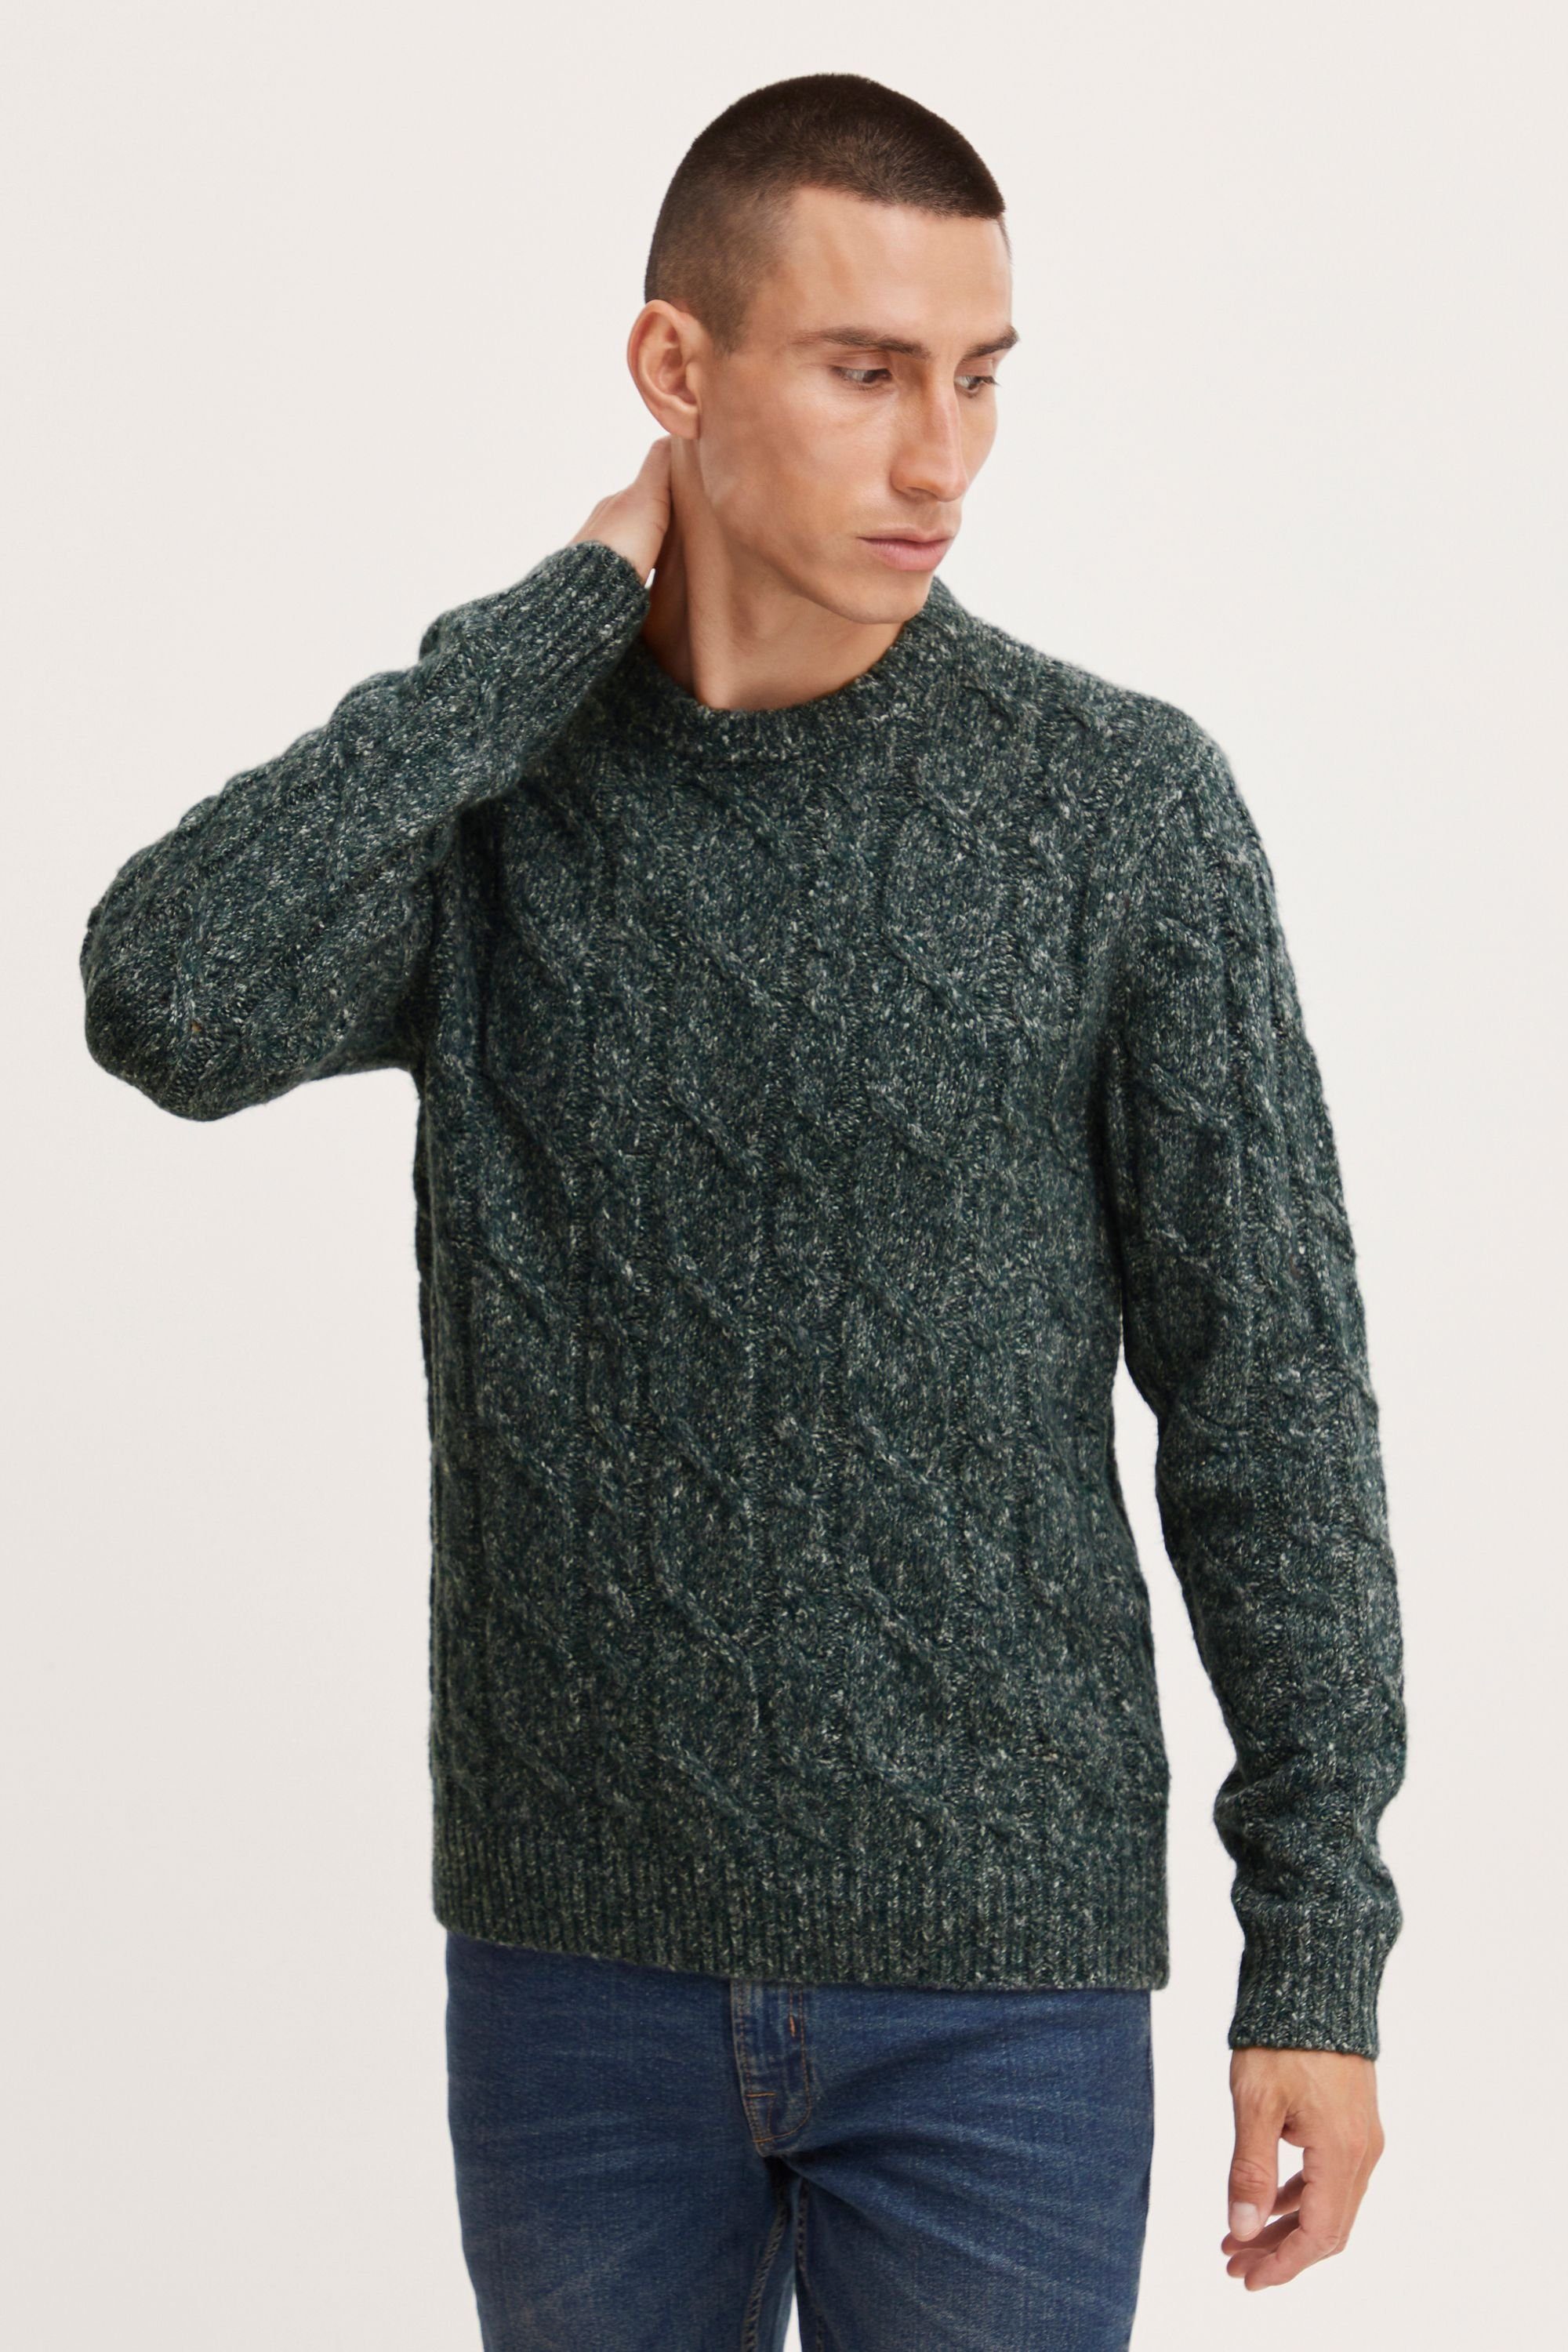 Casual Friday Strickpullover Karl 0044 crew neck cable knit 20504501